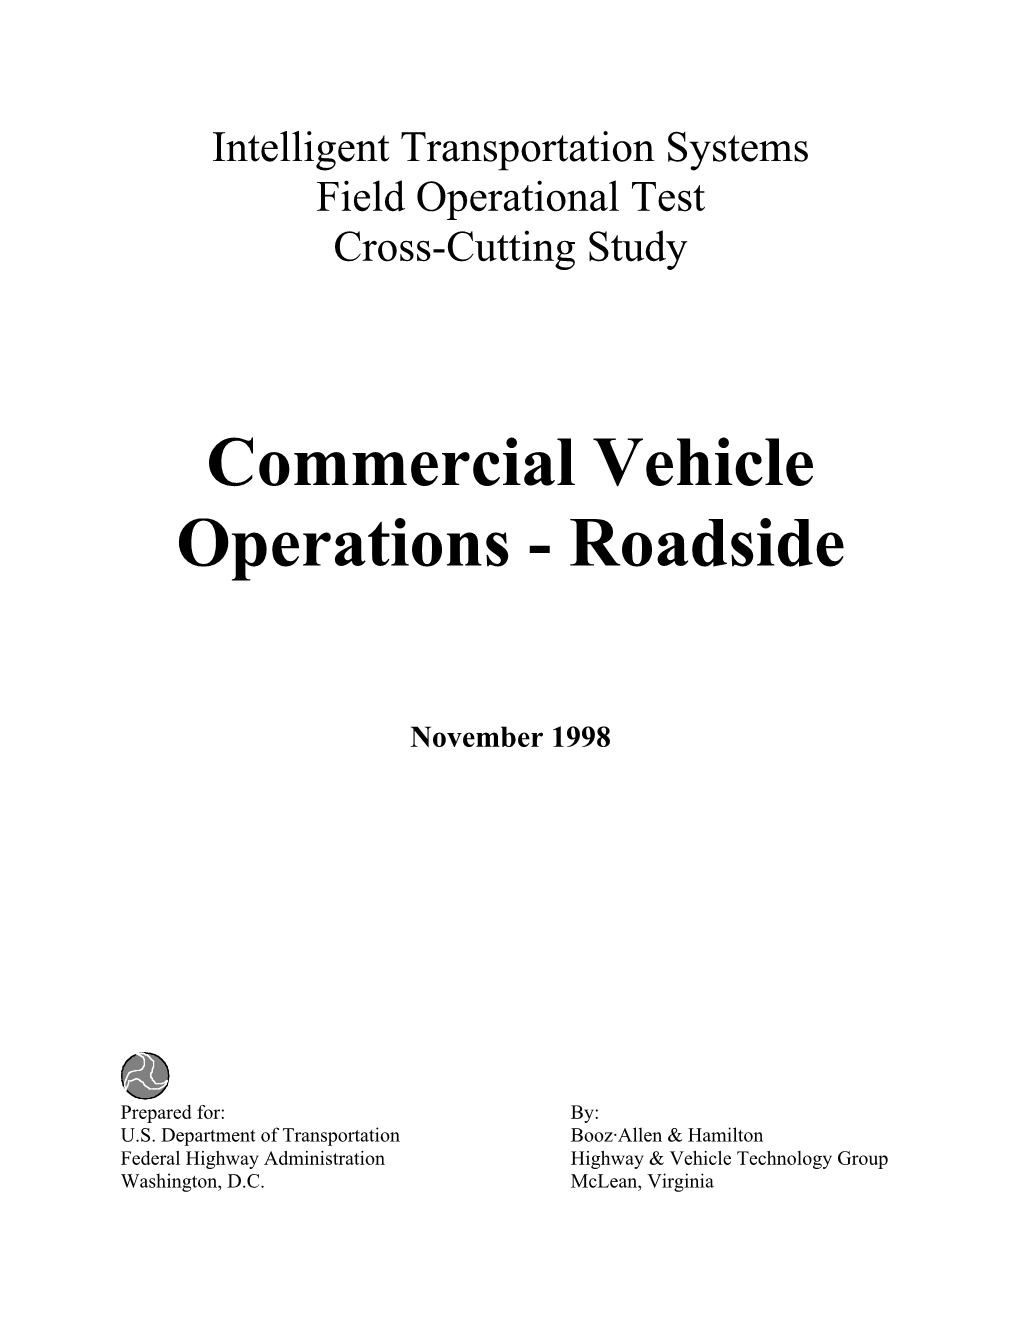 Commercial Vehicle Operations - Roadside